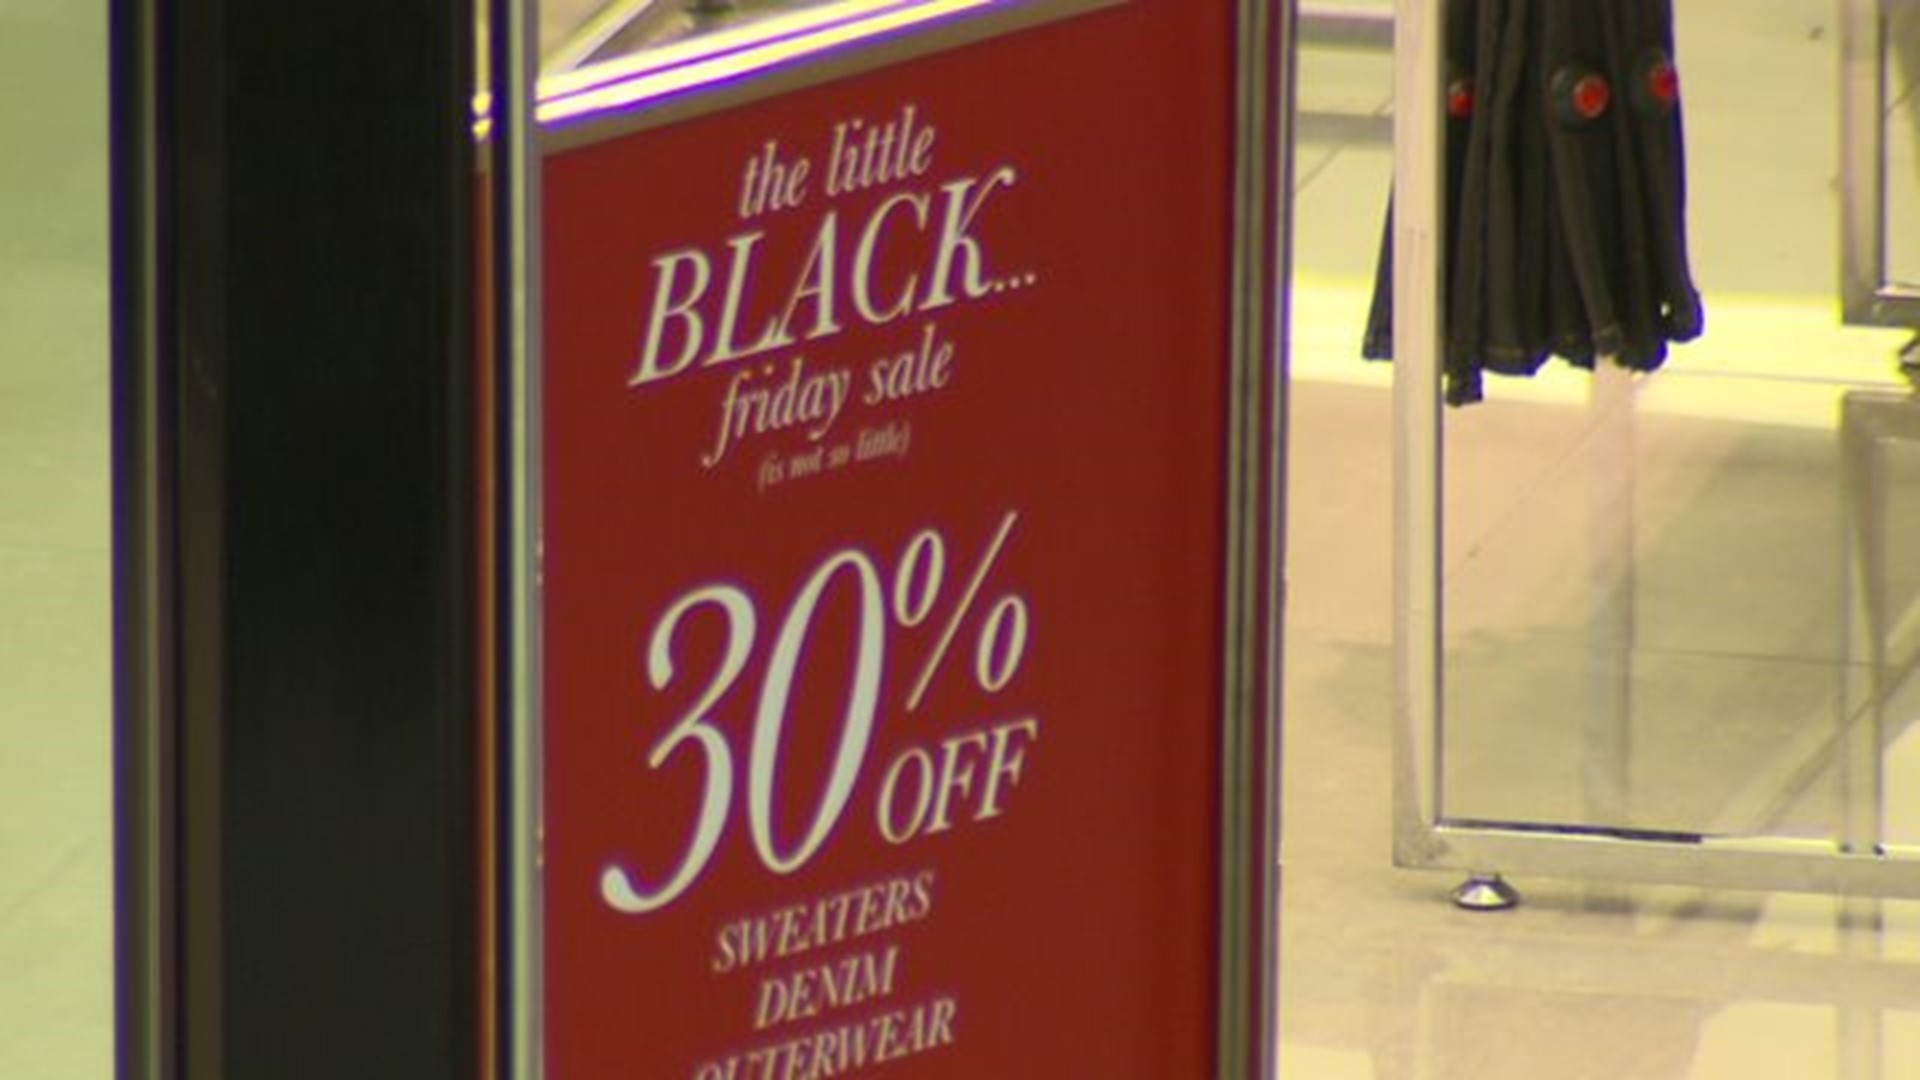 What to expect from stores this Black Friday